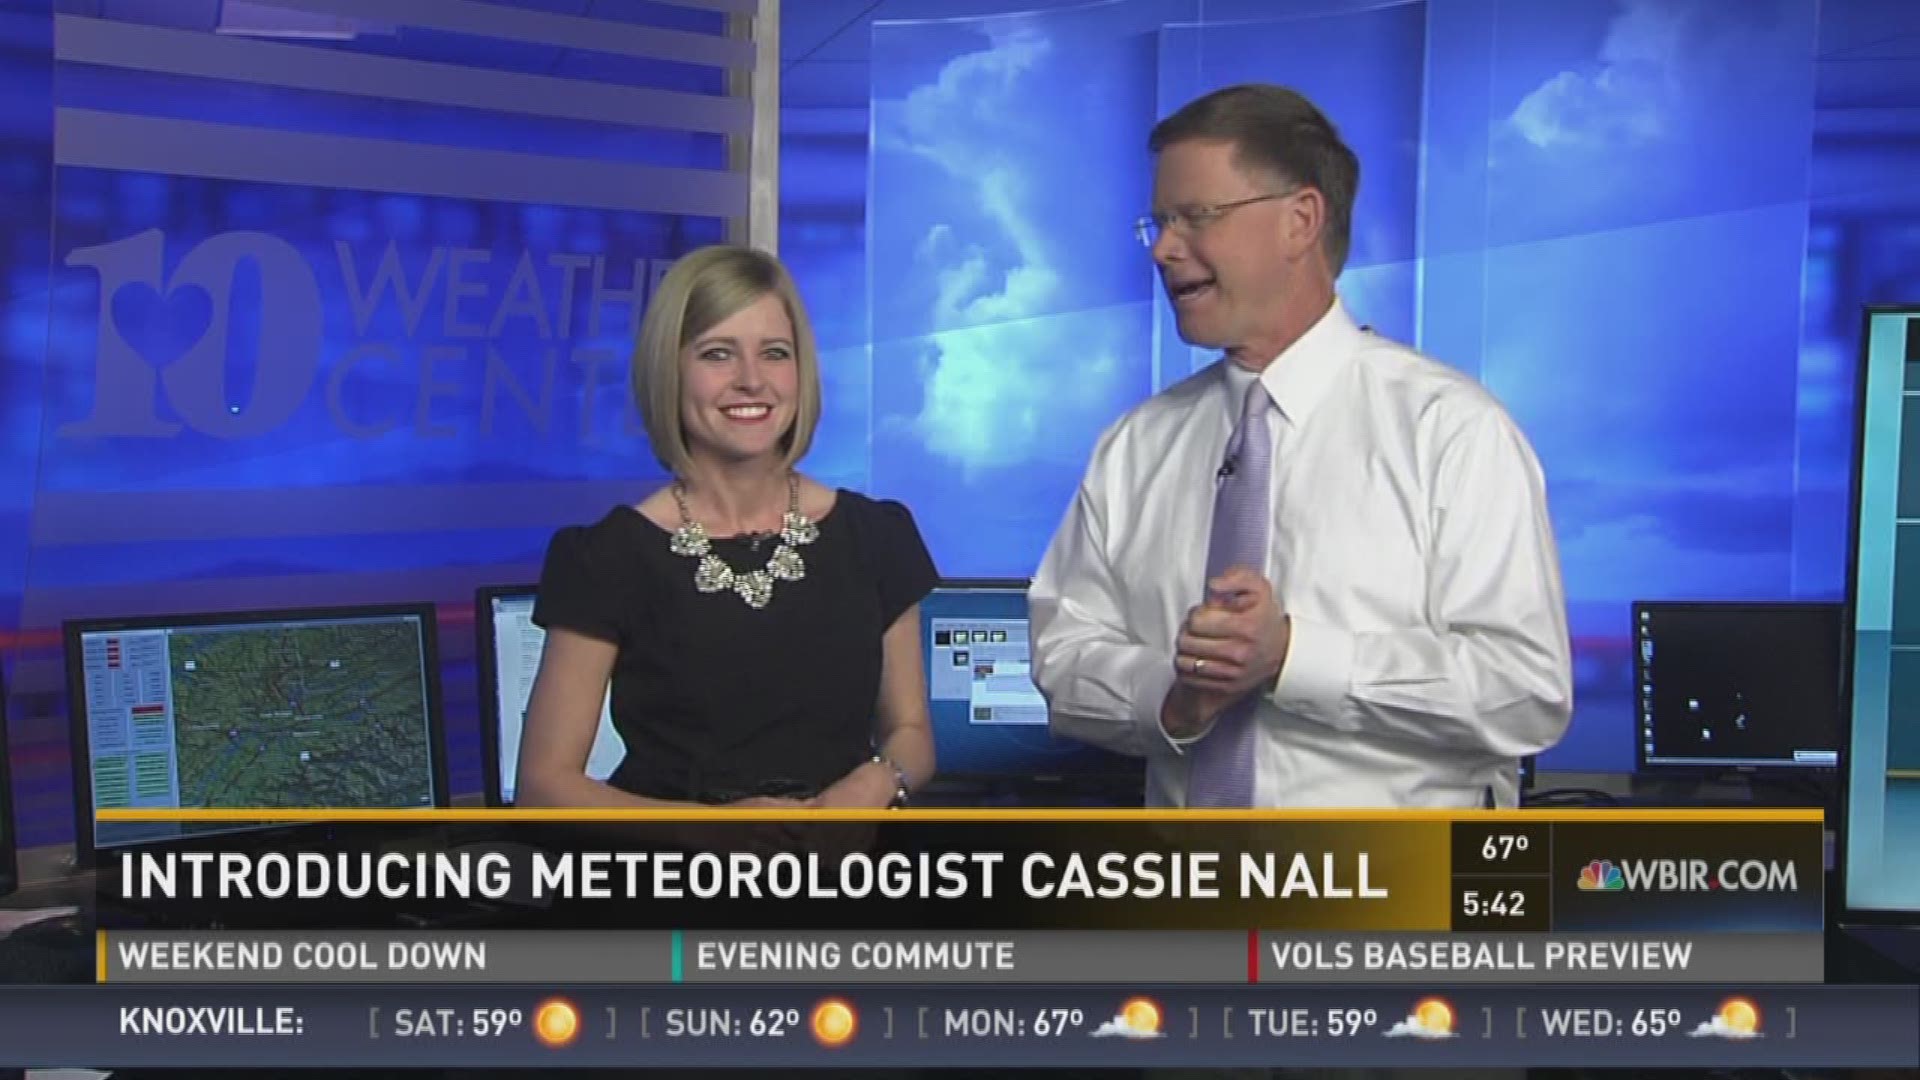 Cassie is getting to know East Tennessee, including how to pronounce some of those unusual names!